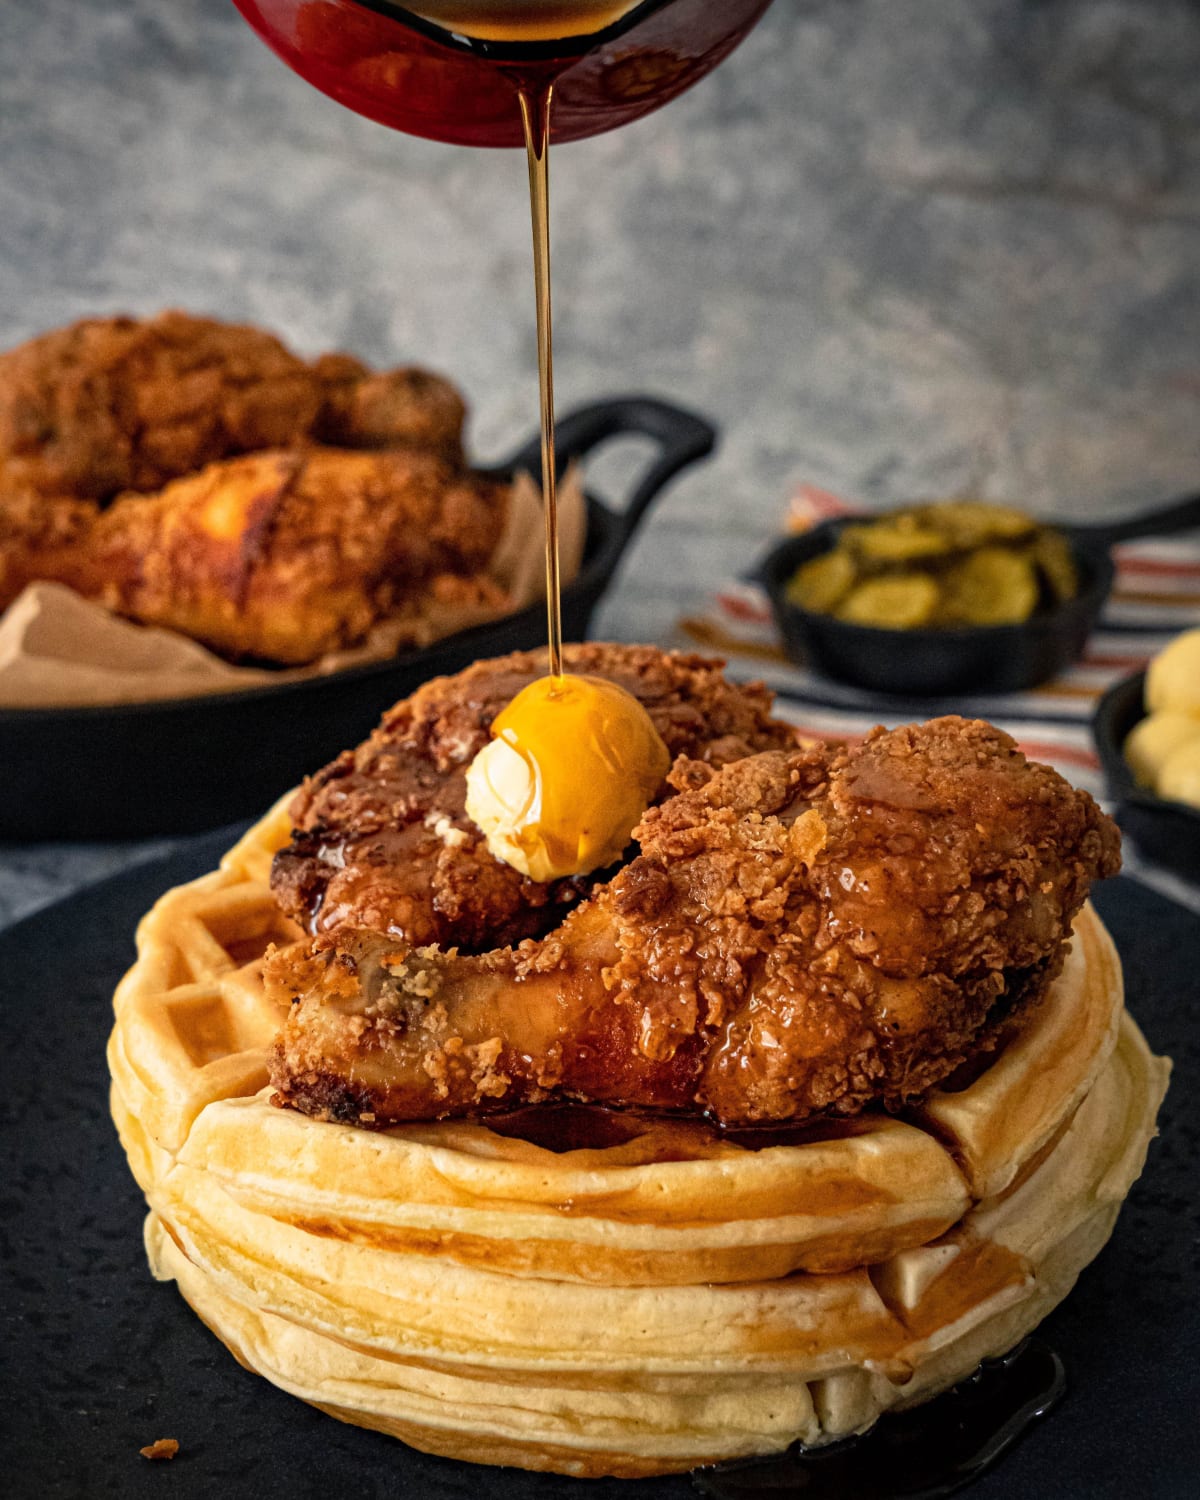 [Homemade] Southern Fried Chicken! — with Buttermilk Waffles & Spicy Honey Butter